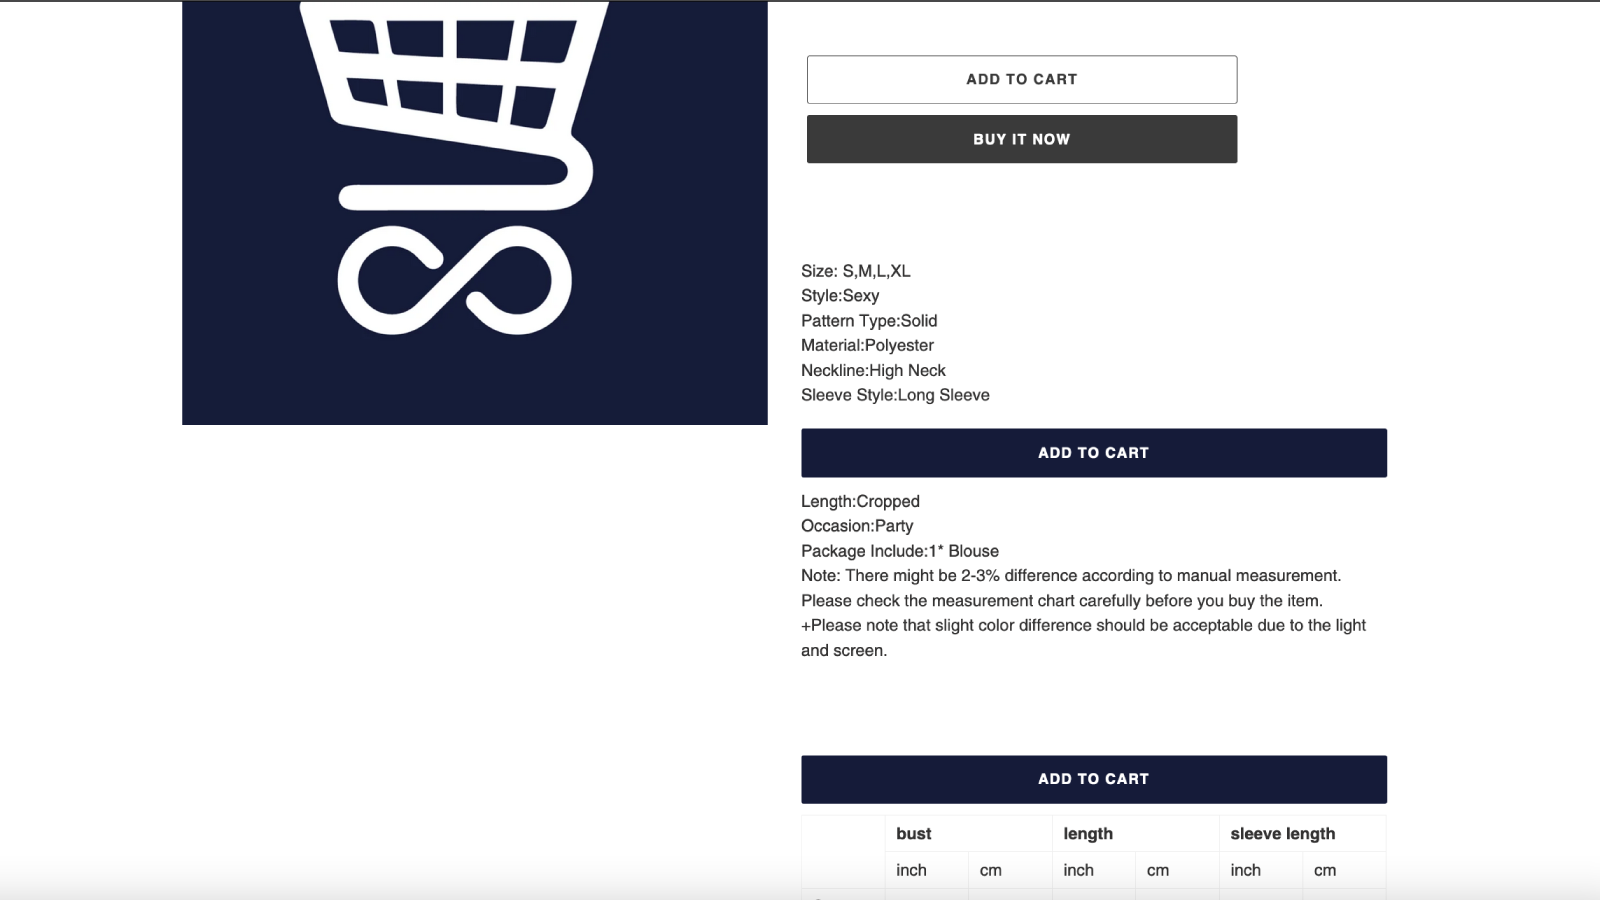 Example of unlimited add to cart buttons